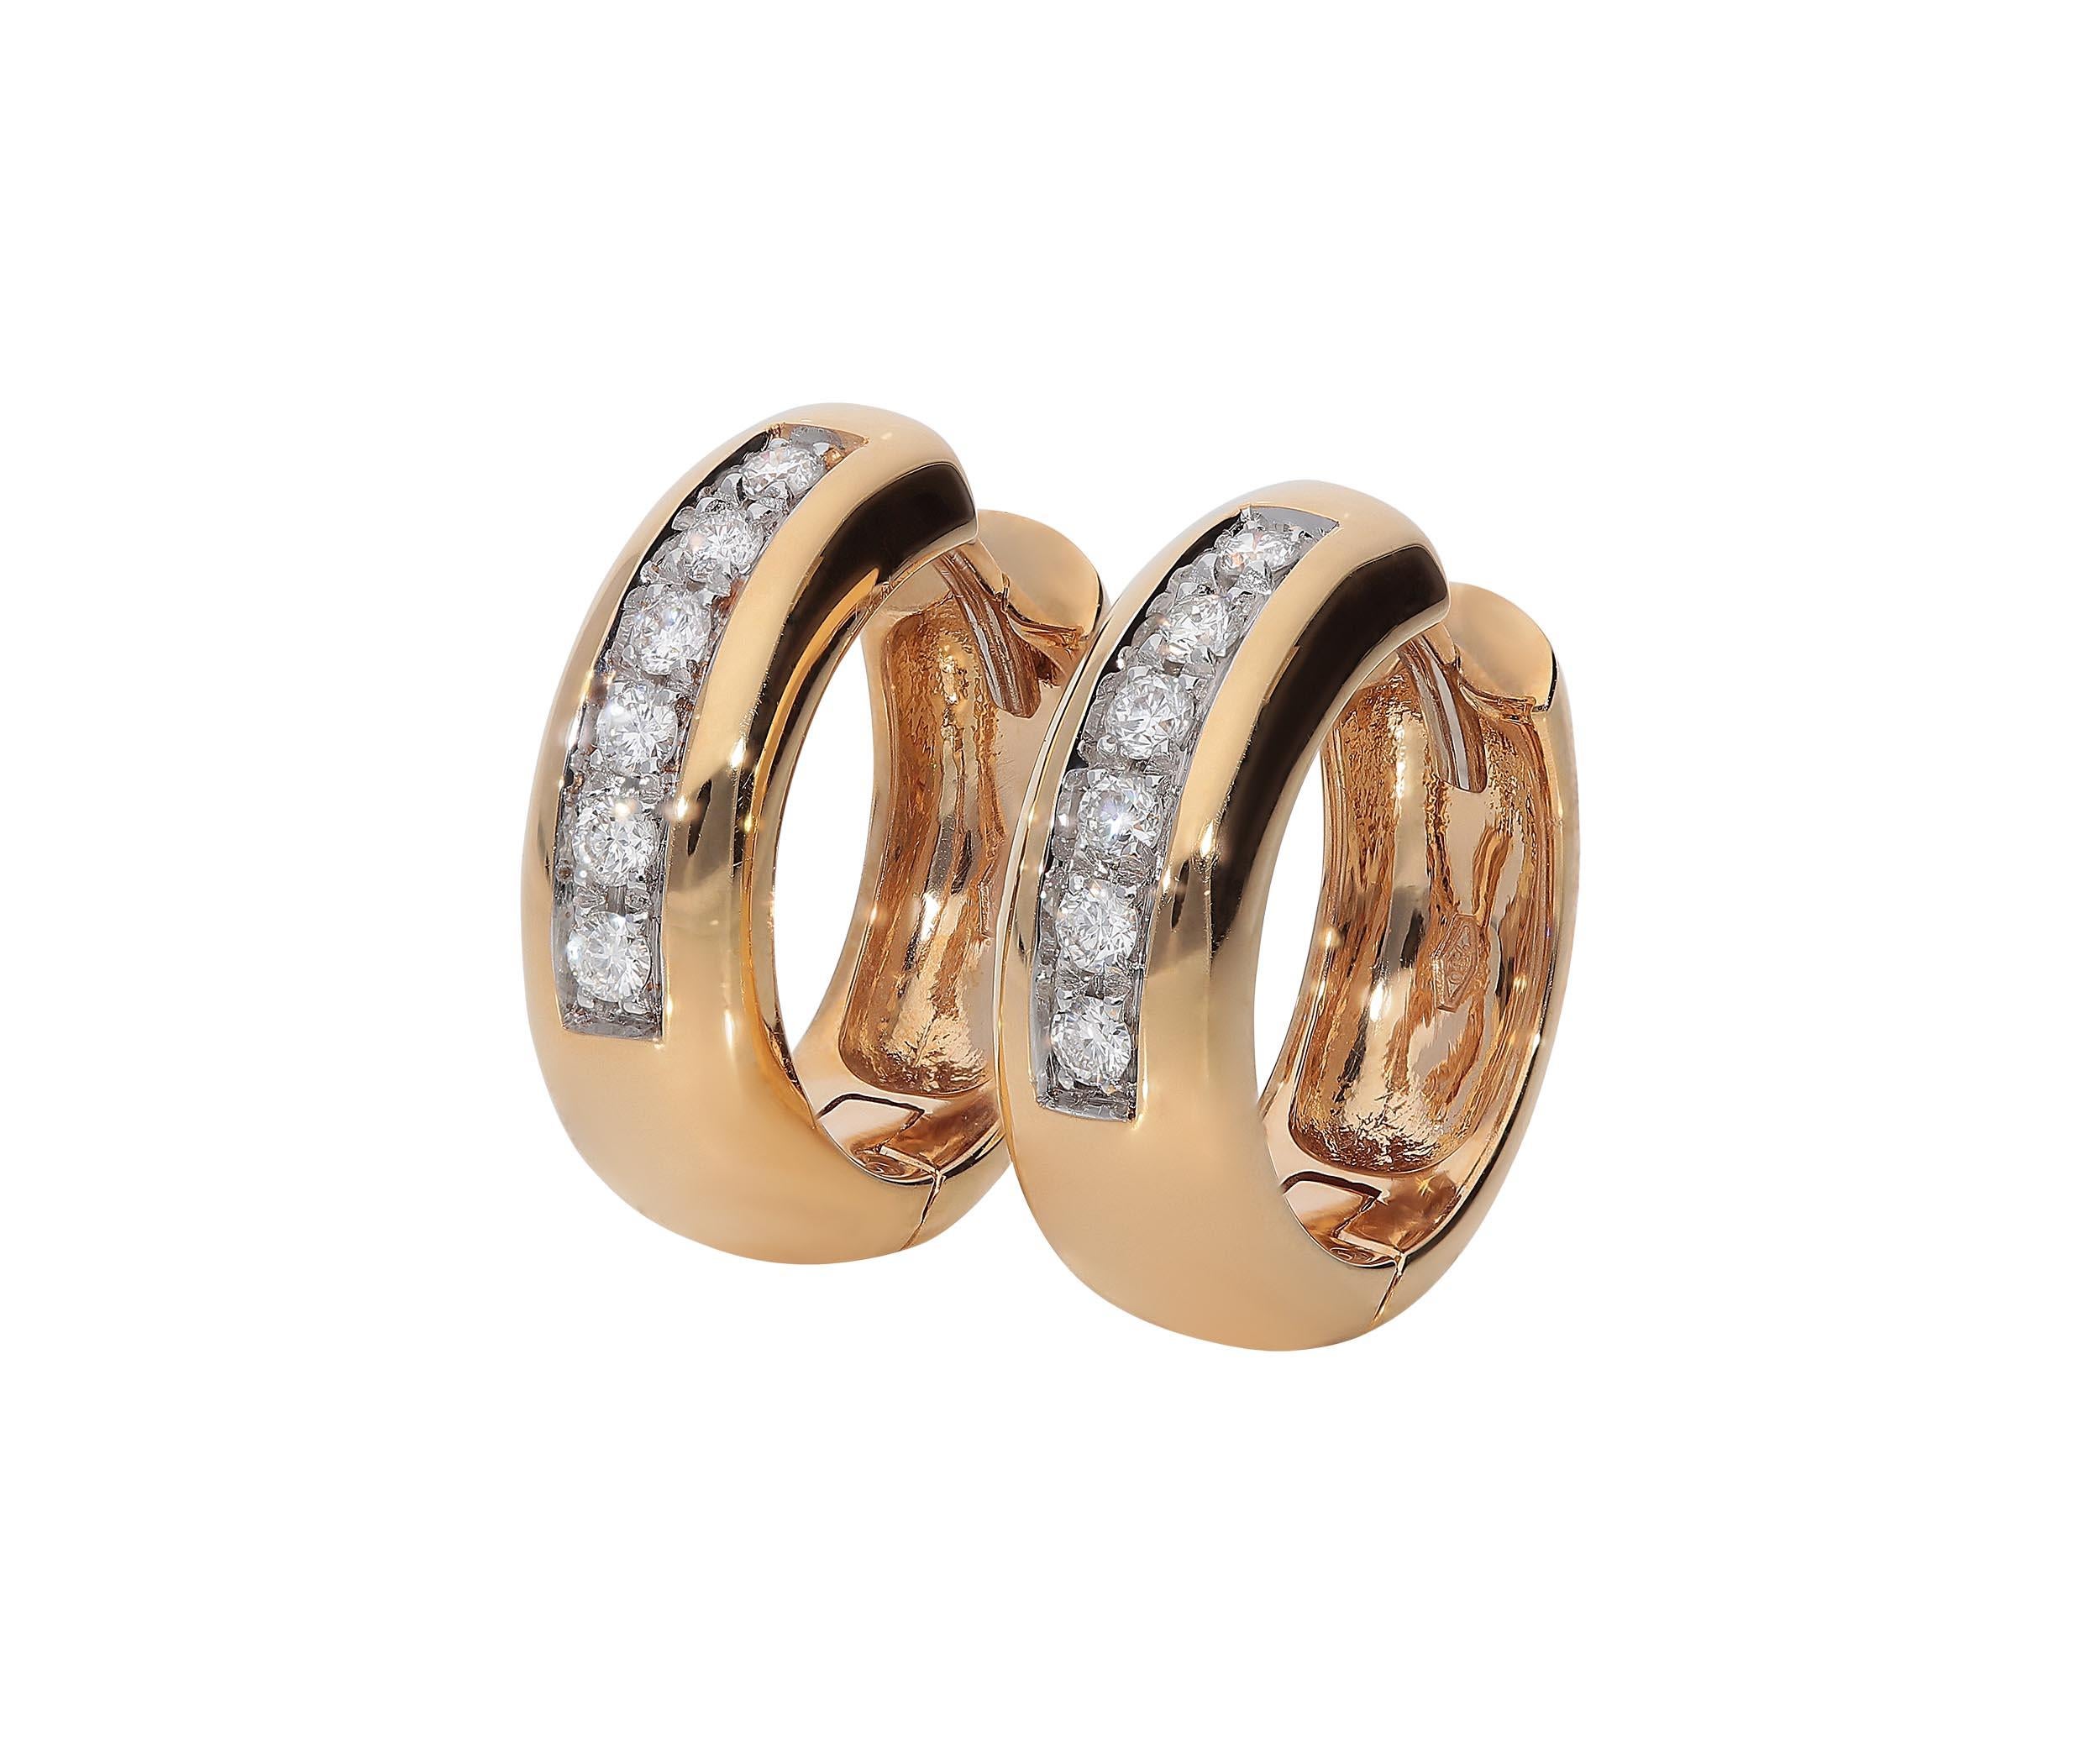 So nice small hoop earrings in 18kt pink gold for 6,20 grams and white round brilliant diamonds color G clarity VS for 0,24 carat.
The external diameter is 1,50 centimeters and the width is 5 millimeters. White rhodium on the row set with white